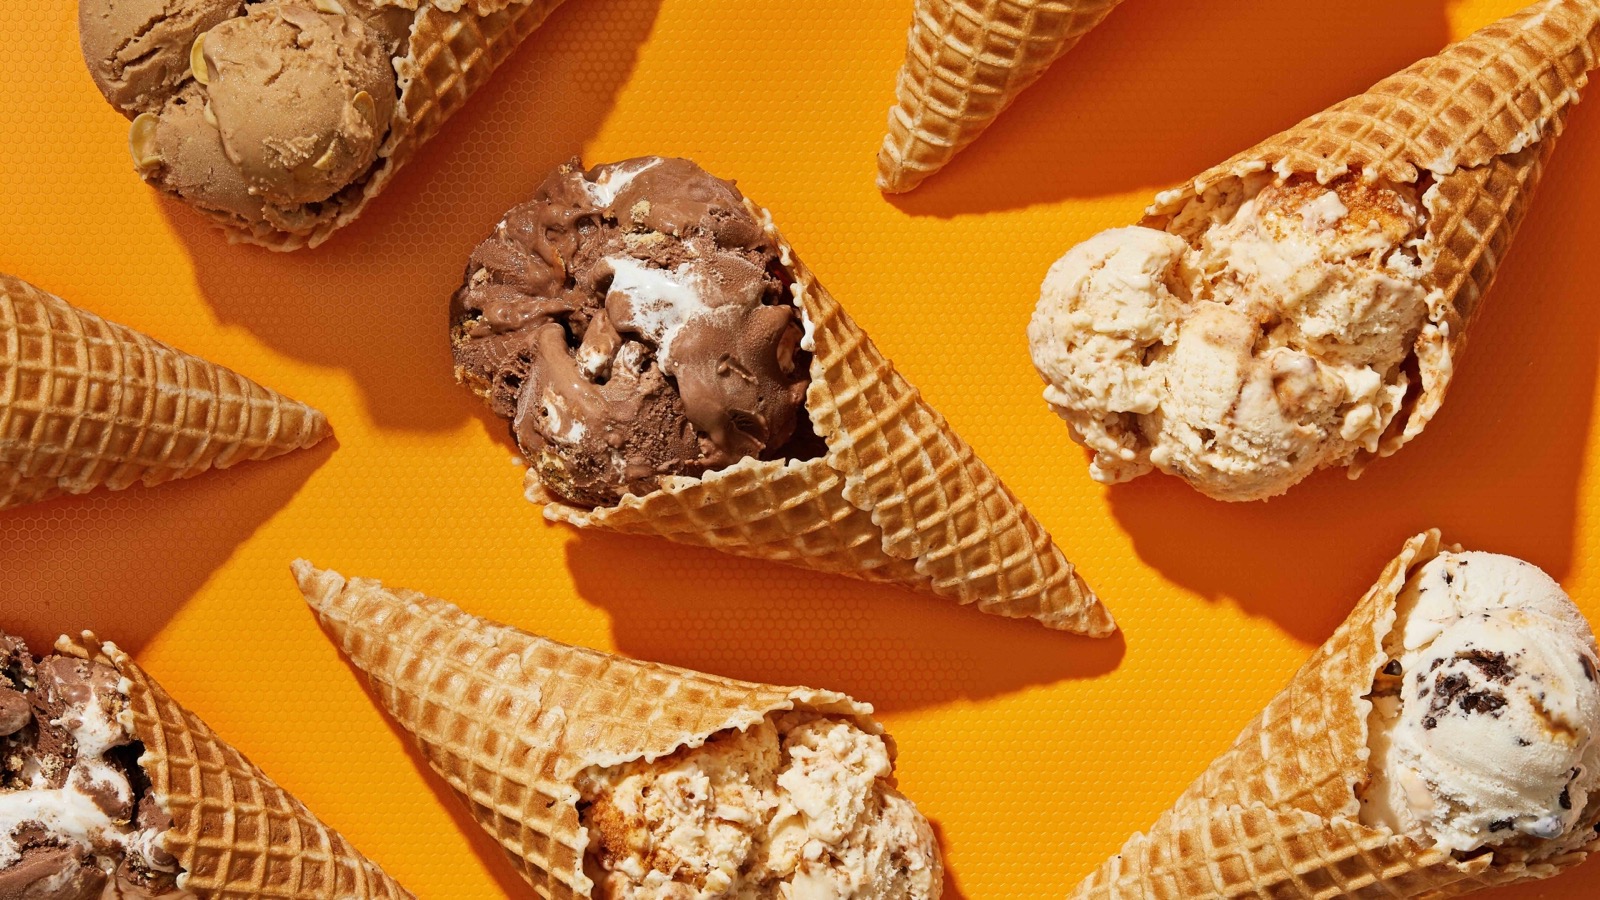 You got: Ice Cream Cone! 🍰 Eat Desserts, Desserts, And More Desserts to Find Out What Summer Food You Embody 😎